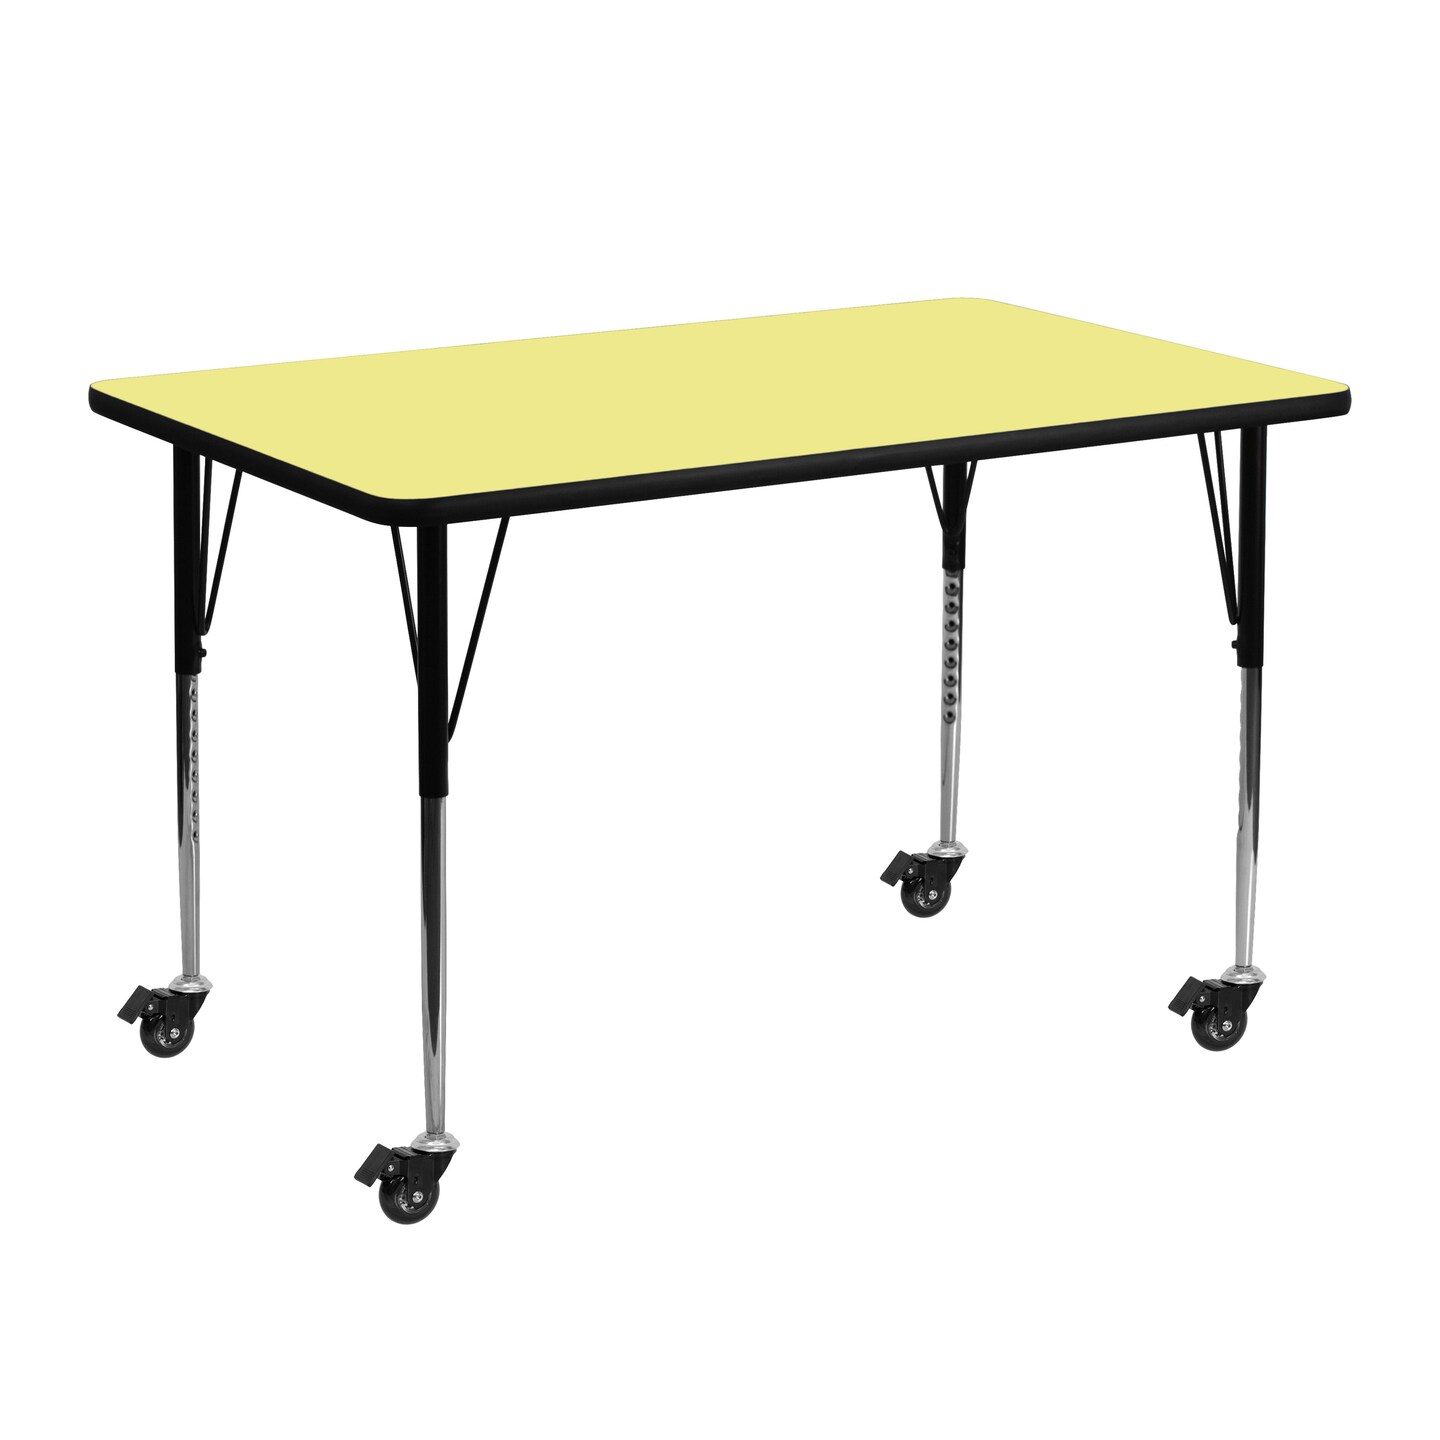 Emma and Oliver Mobile 24x48 Rectangle Laminate Adjustable Activity Table